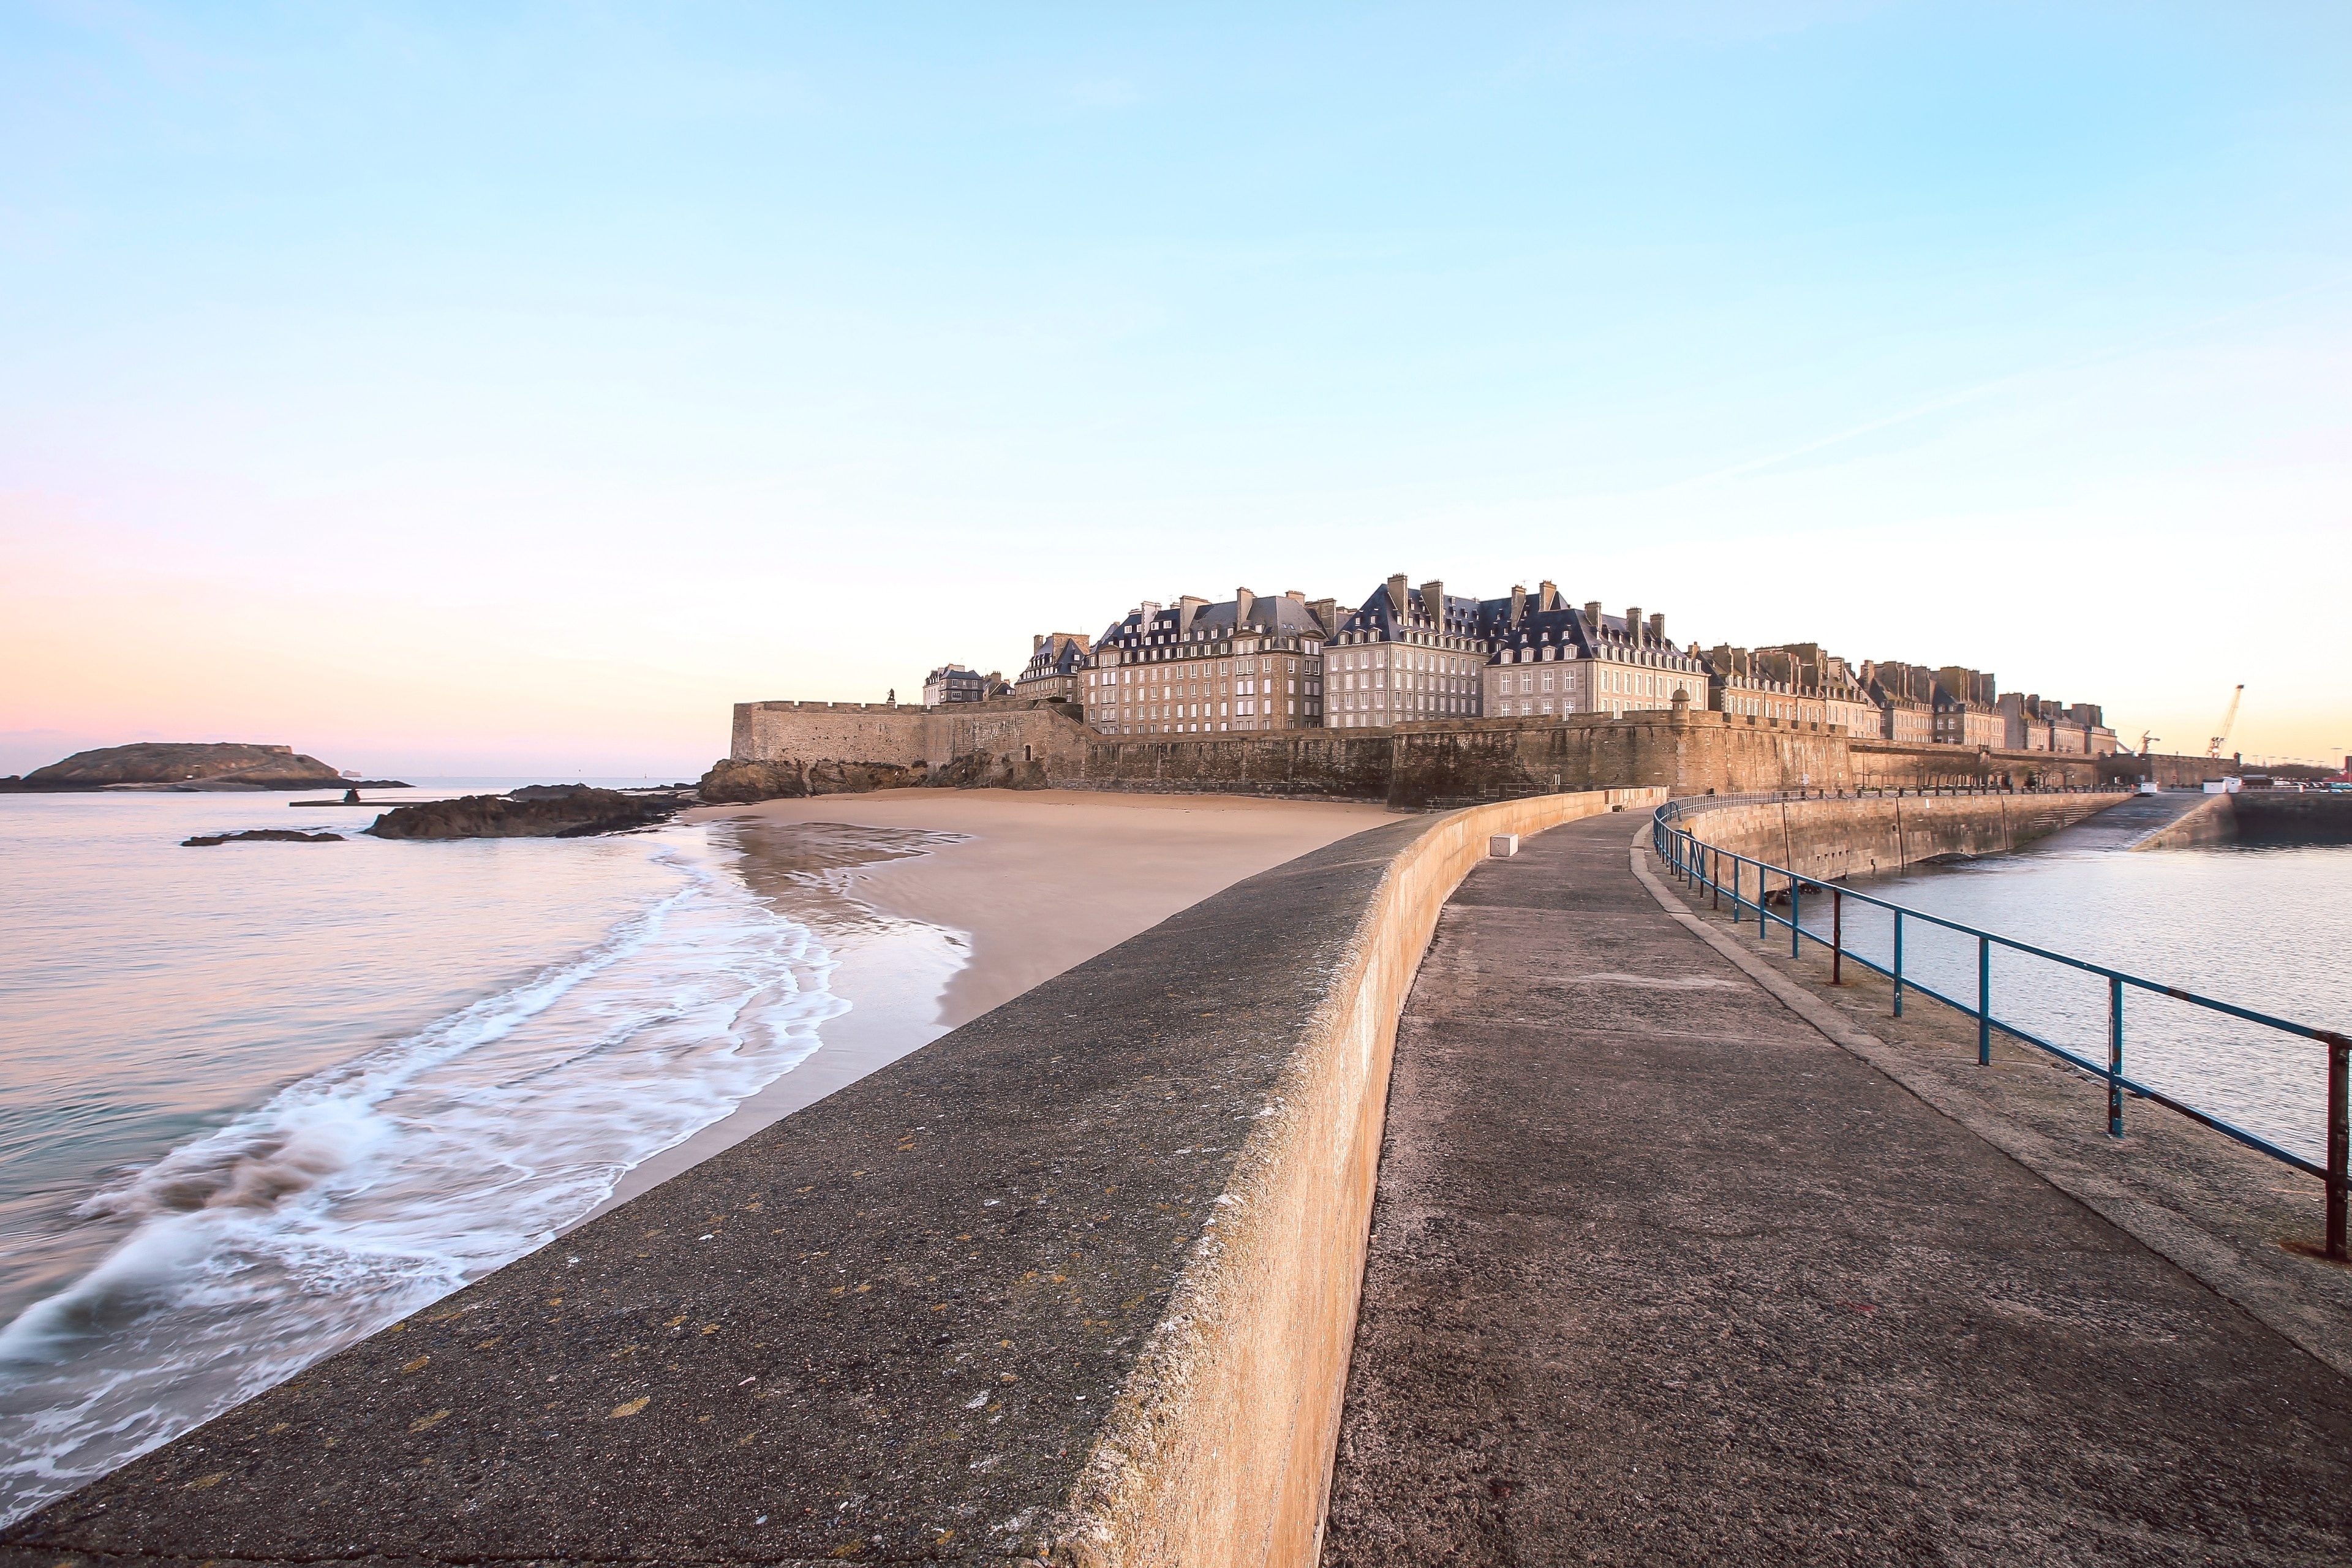 Spend a day at Saint-Malo’s lovely beach, enjoying watersports and basking in the sun. You’ll discover why it is rated one of the most beautiful beaches in France.